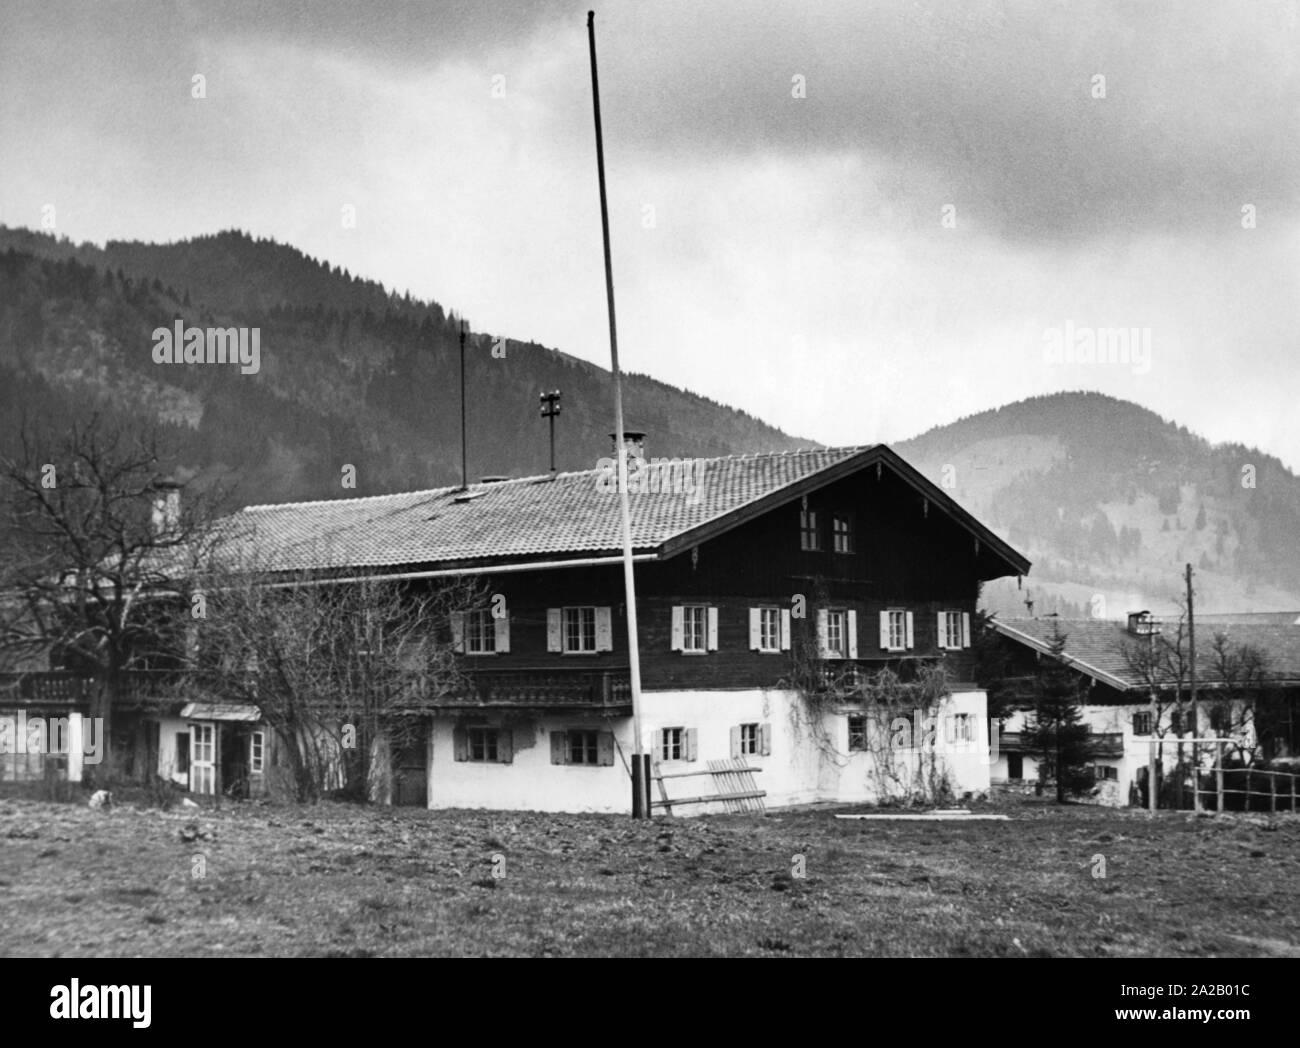 The 'Schoberhof' in Fischhausen was the home of the National Socialist politician Hans Frank and his family between 1936 and 1945. Undated photo, probably in the post-war years. Stock Photo